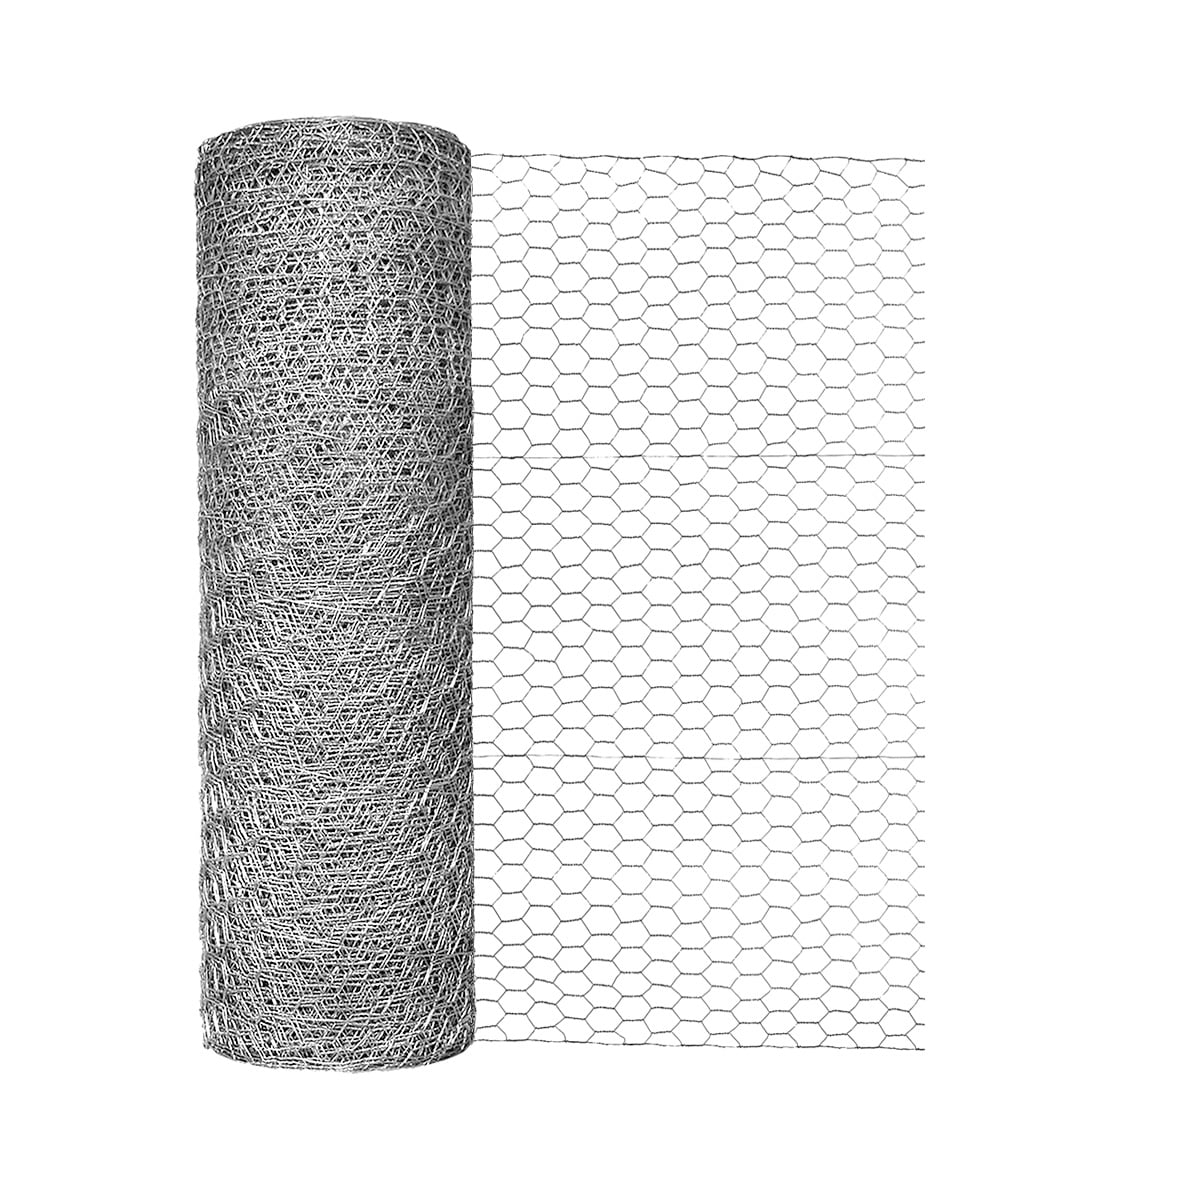 Galvanized Poultry Net Metal Mesh Fencing Chicken Wire Rustic Silver 40" 1-20yd 